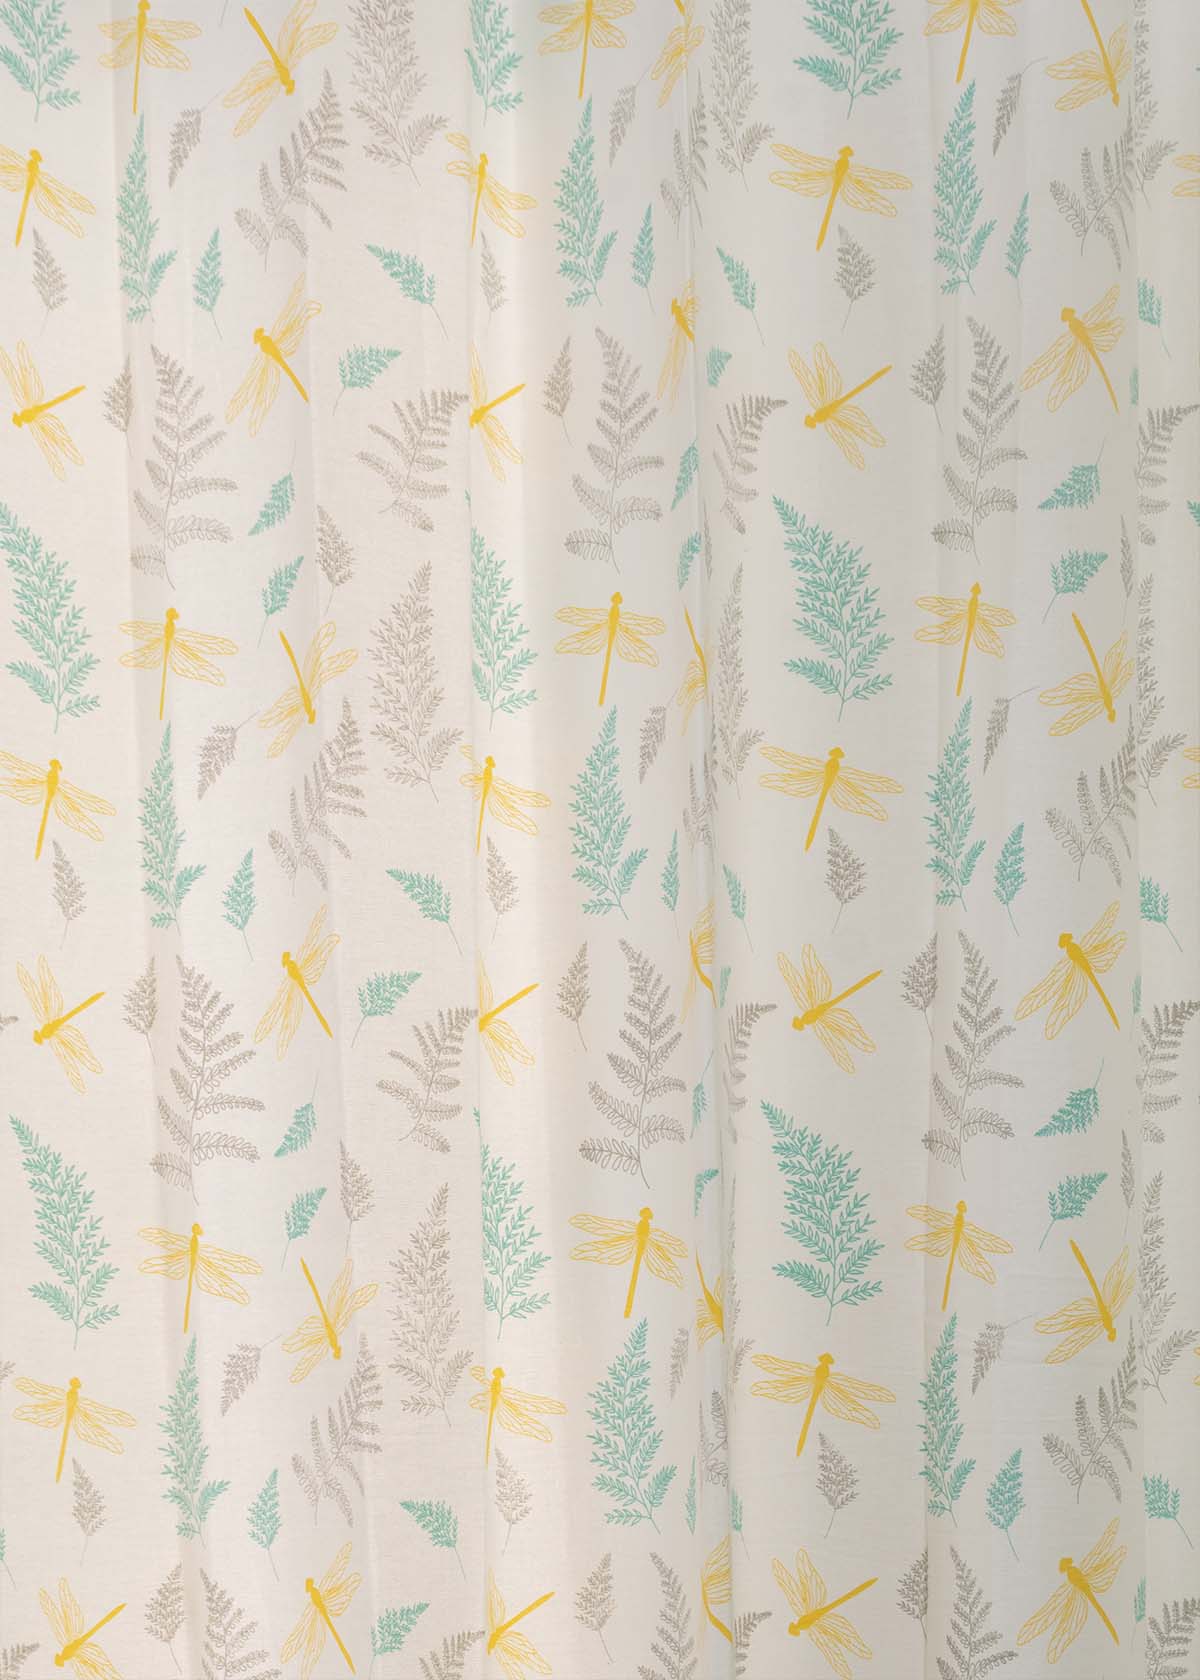 Winged Skies 100% Customizable Cotton floral curtain for kids room, living room & bed room - Room darkening - Yellow